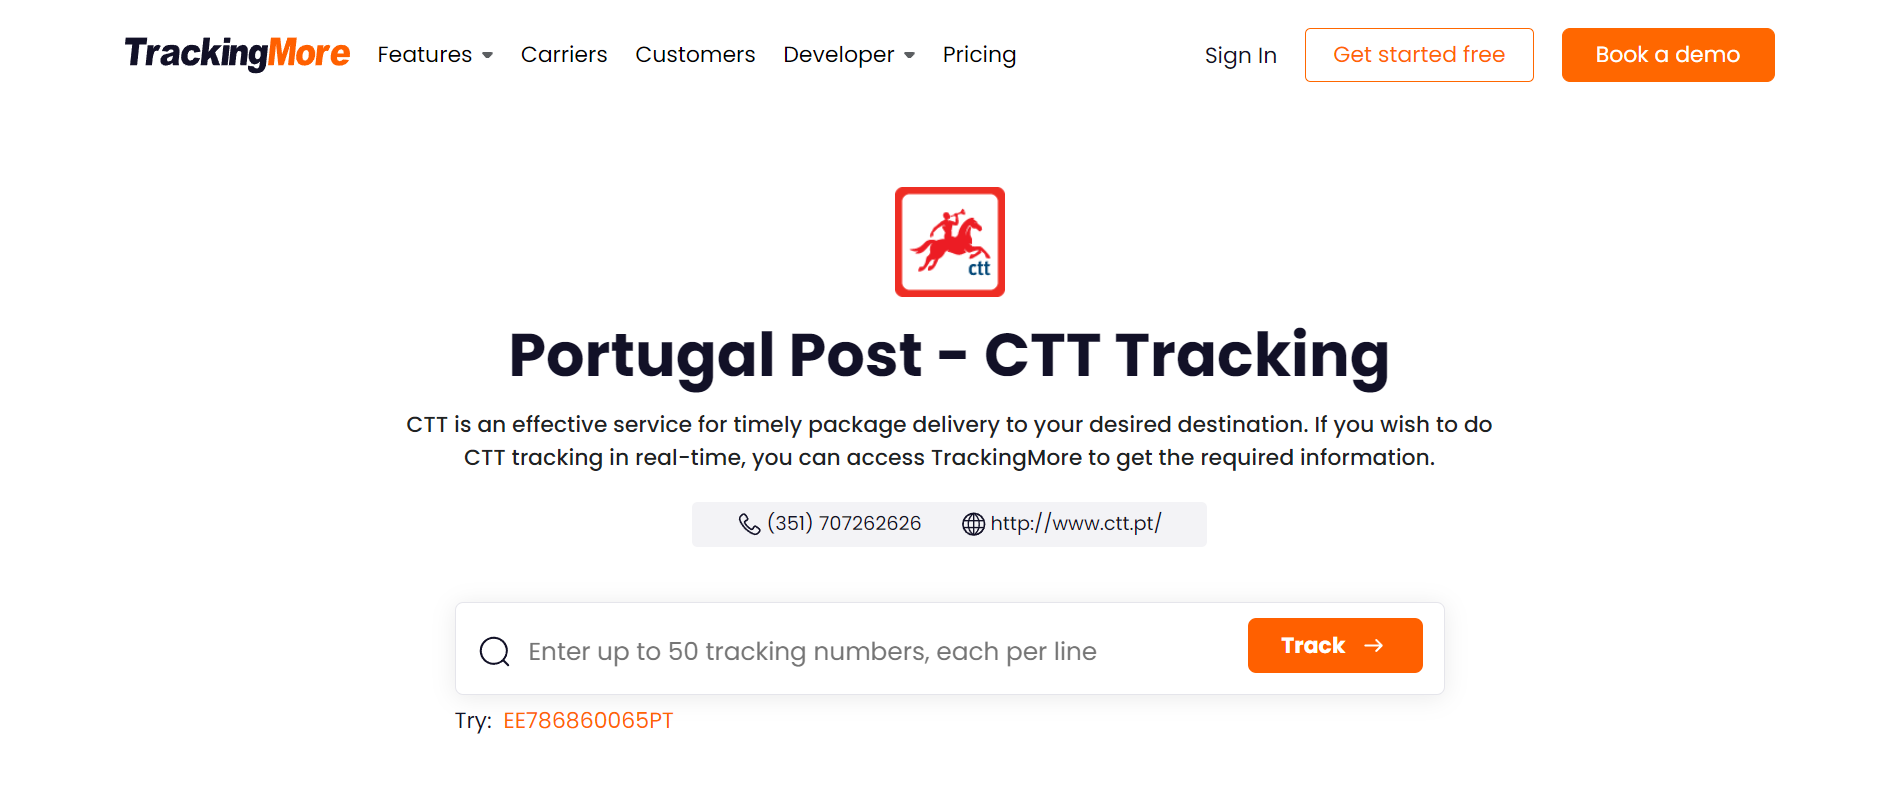 TrackingMore CTT tracking page